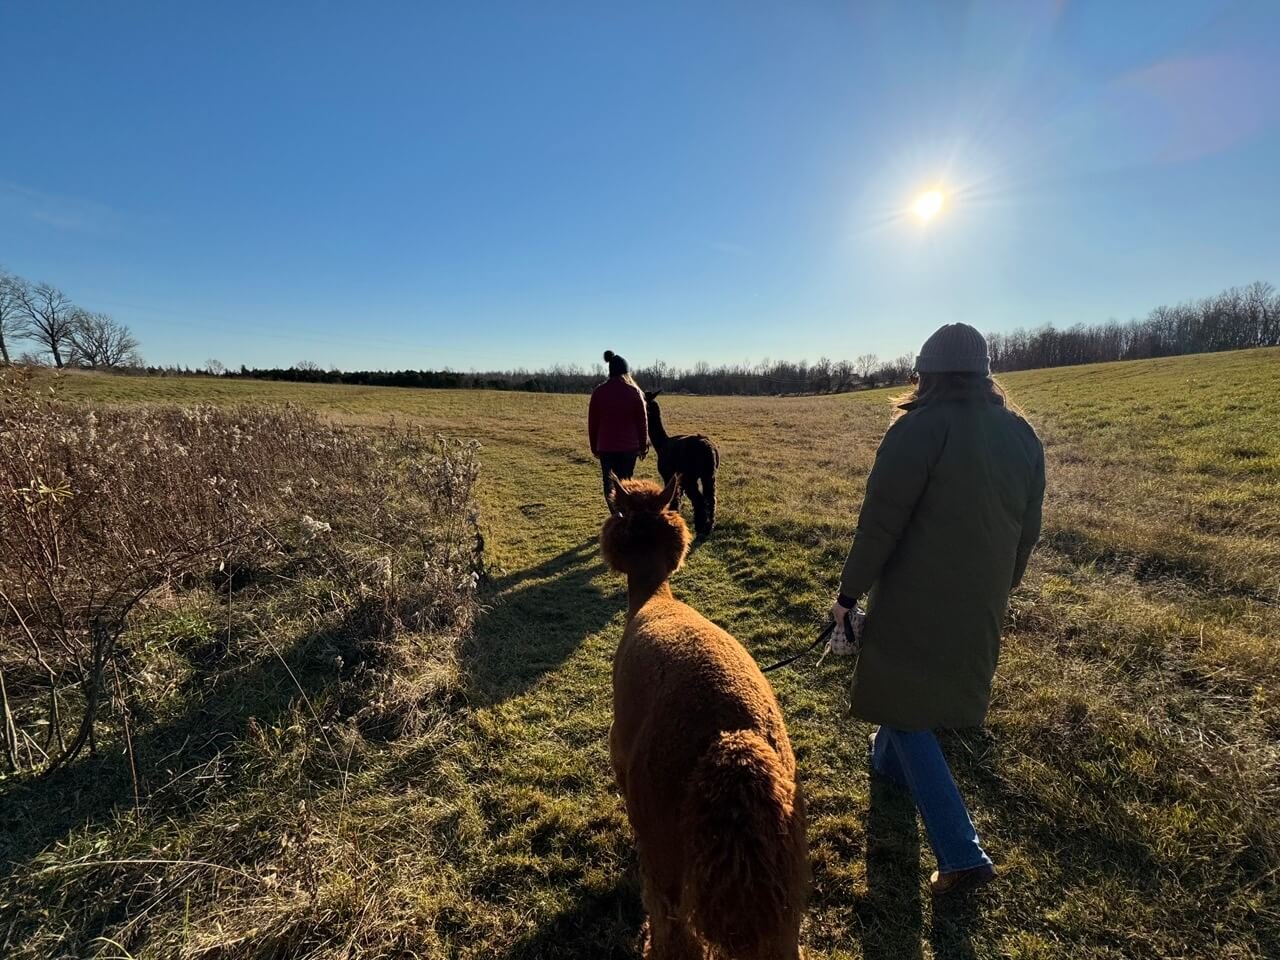 An afternoon walk through the hay fields with owner Katie, Allison, Miguel, Puck and Joker